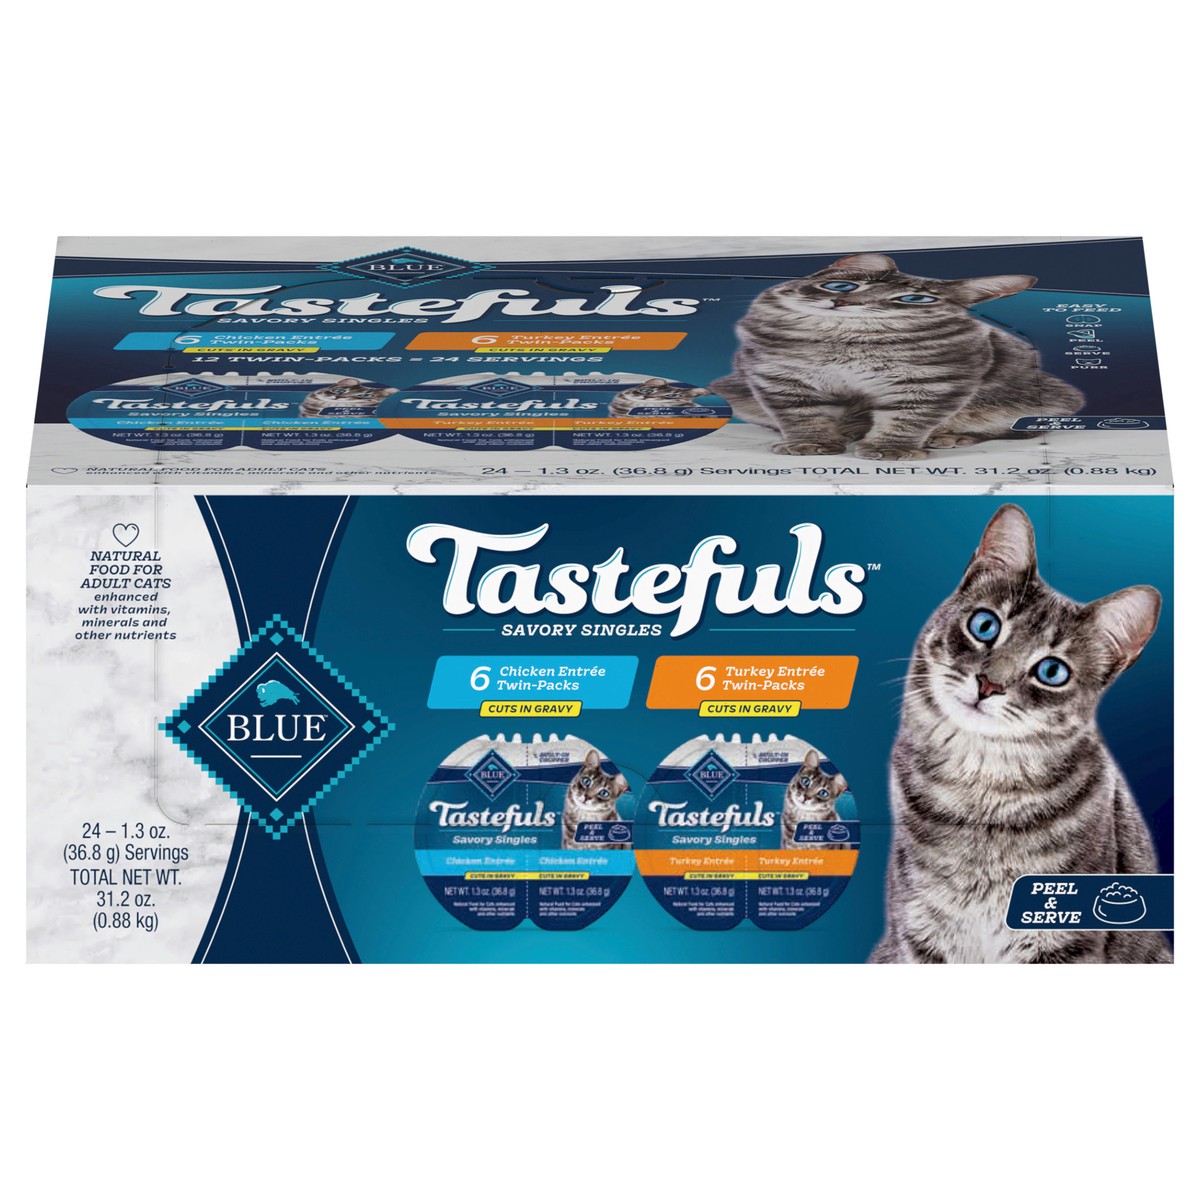 slide 1 of 43, Blue Buffalo Tastefuls Savory Singles Adult Cuts in Gravy Wet Cat Food Variety Pack, Chicken and Turkey Entrée, 2.6-oz Twin-Pack Tray (12 Count - 6 of Each Flavor), 12 ct 2.6 oz